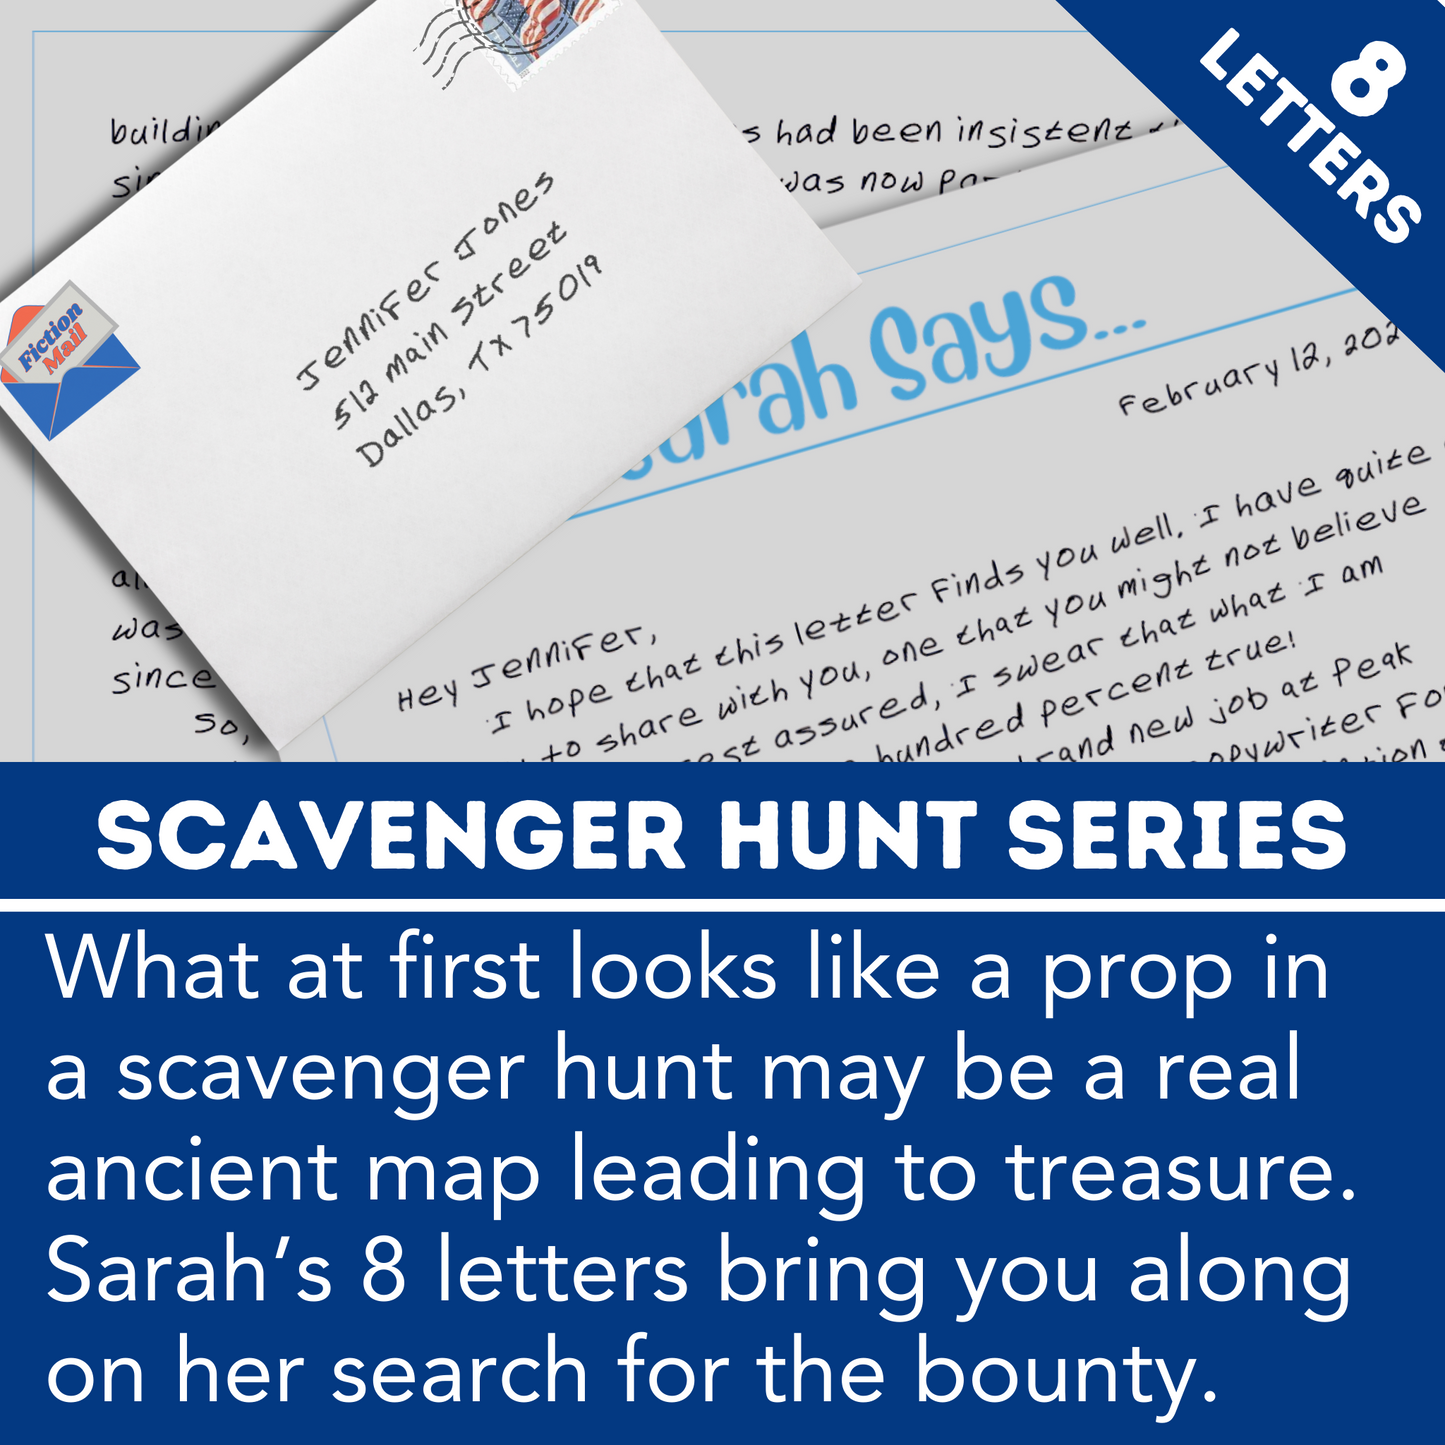 Scavenger Hunt Series of Fiction Mail - join Sarah on her hunt for hidden treasure as she writes you 8 weekly letters.